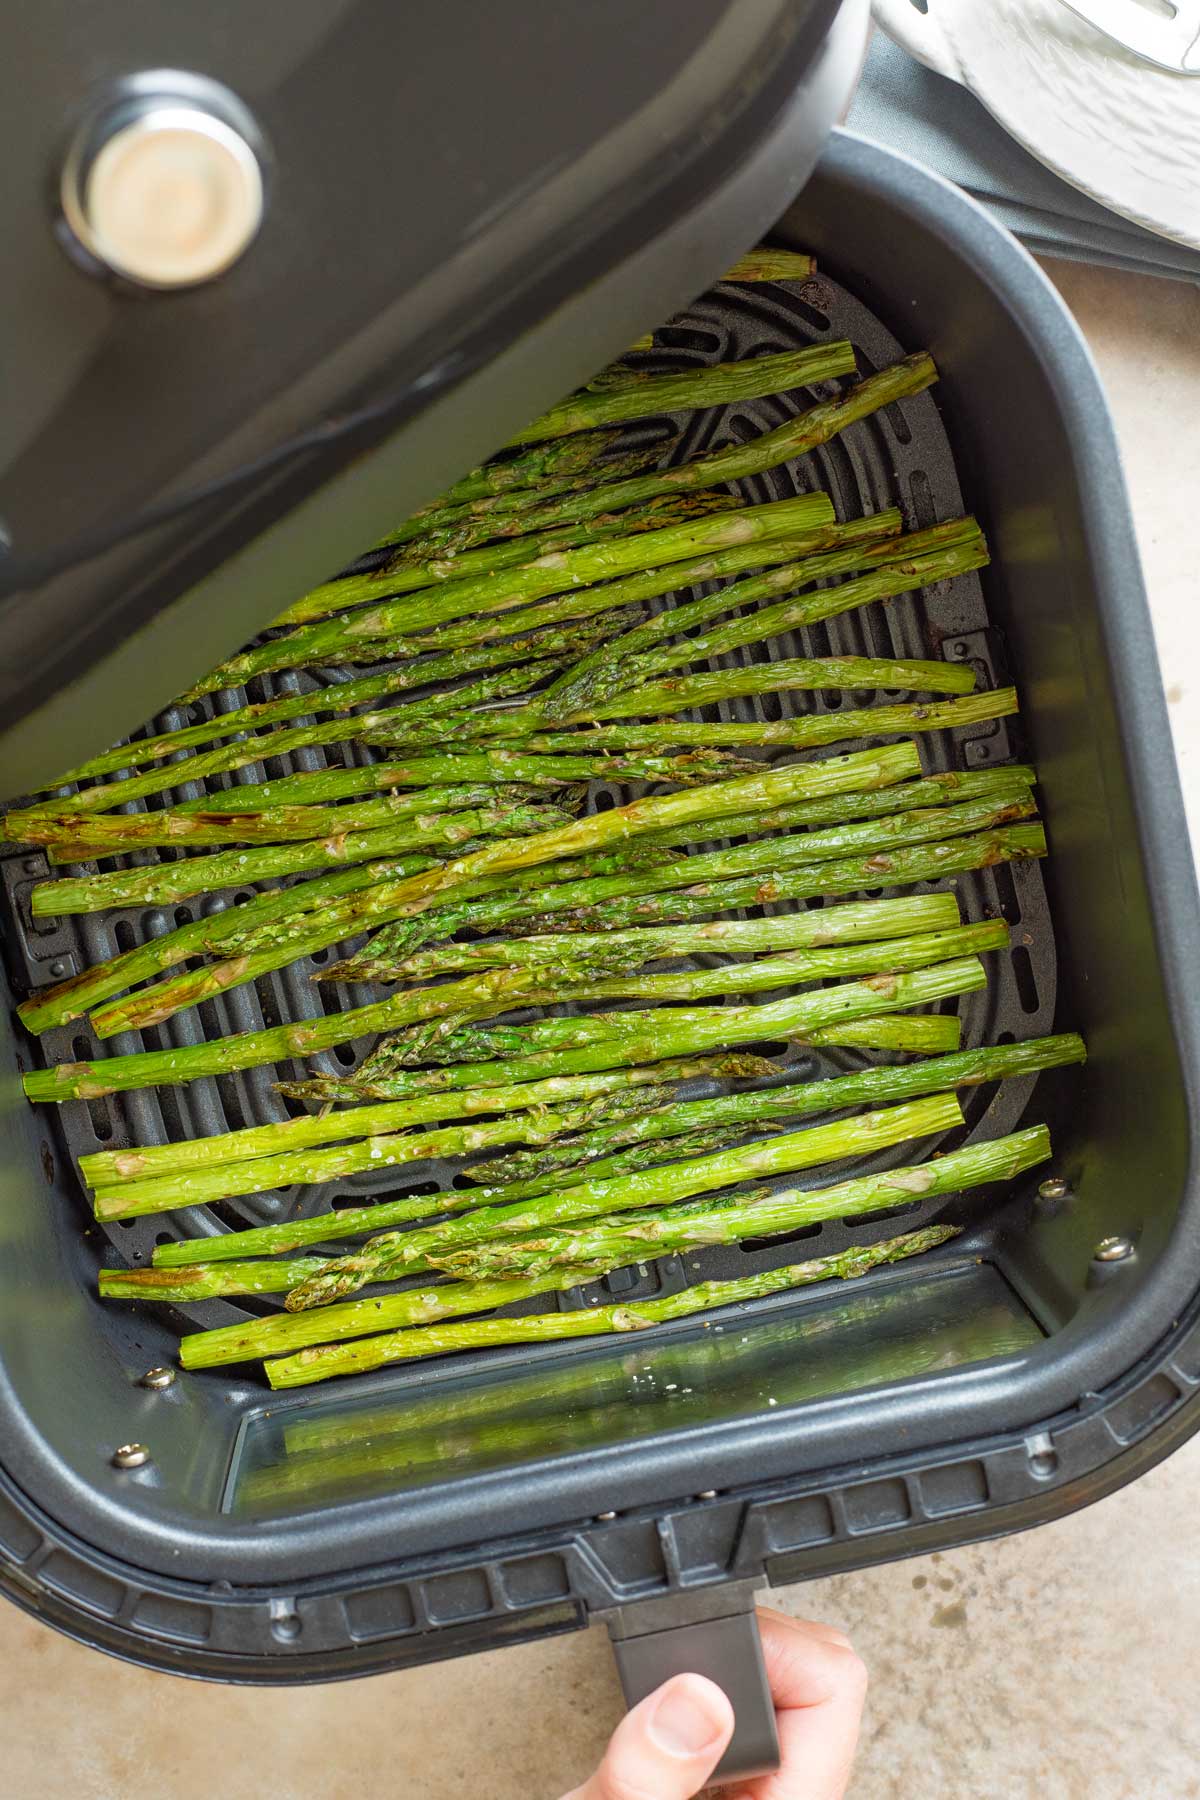 Overhead of hand pulling open air fryer drawer full of cooked asparagus, after cooking is finished.